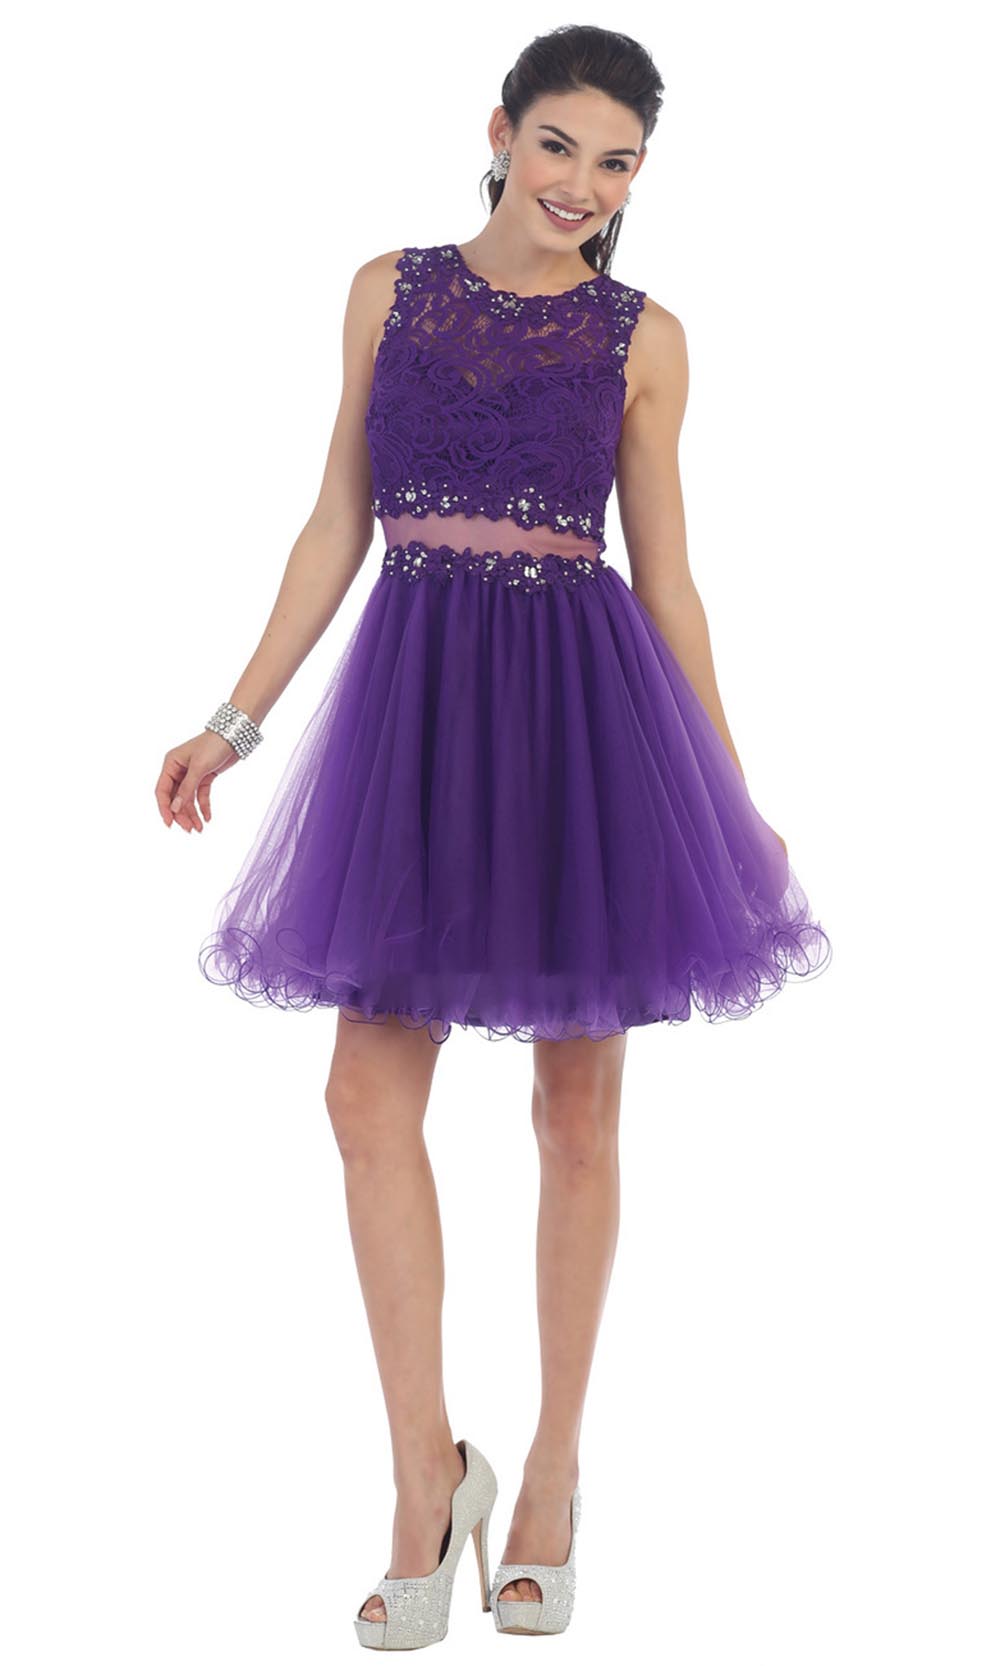 May Queen - MQ1268 Jewel Embroided Cocktail Dress In Purple